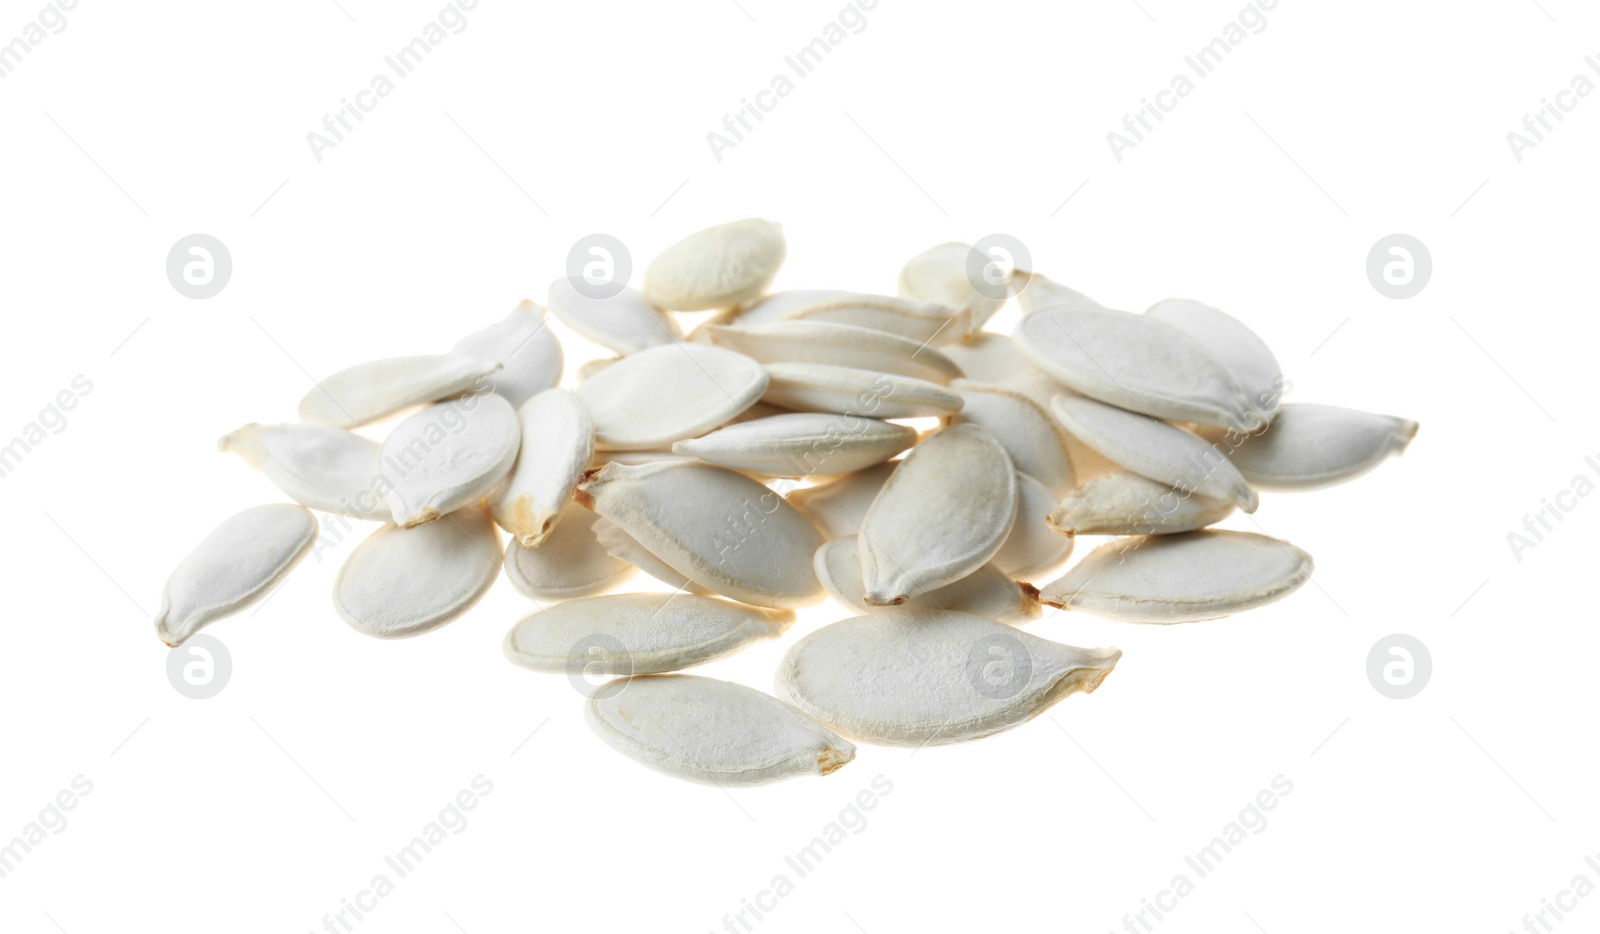 Photo of Pile of raw pumpkin seeds isolated on white. Vegetable planting